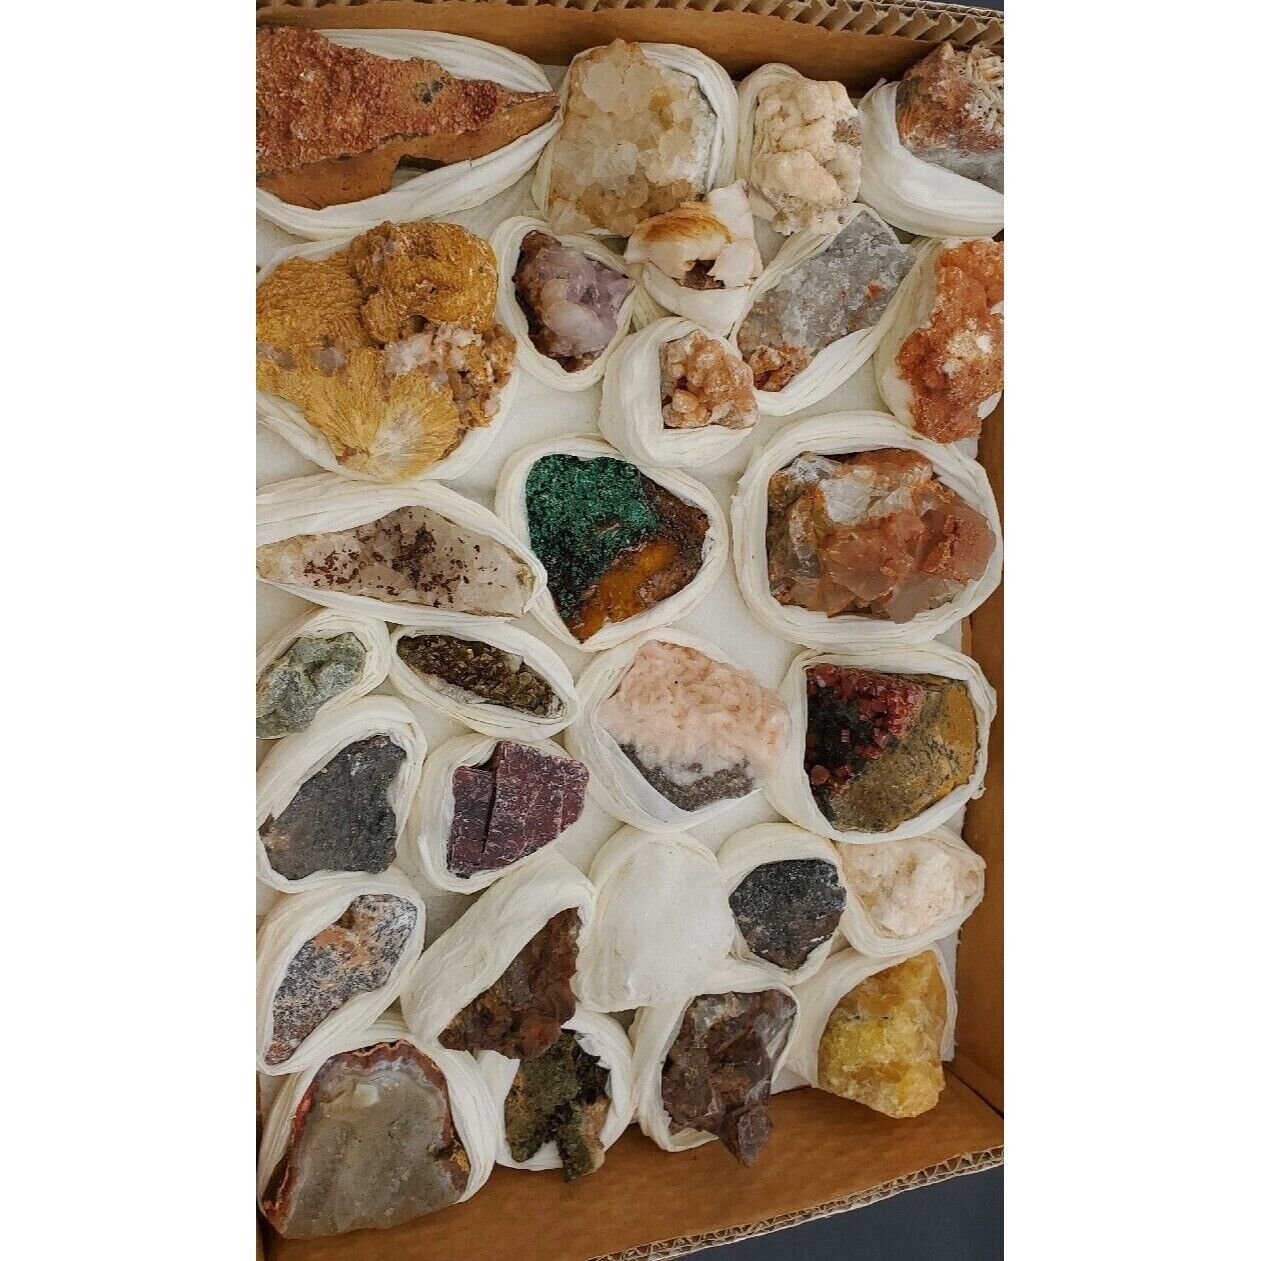 5Lb Wholesale minerals Flat Lot of 29 specimens From Morocco Africa #55